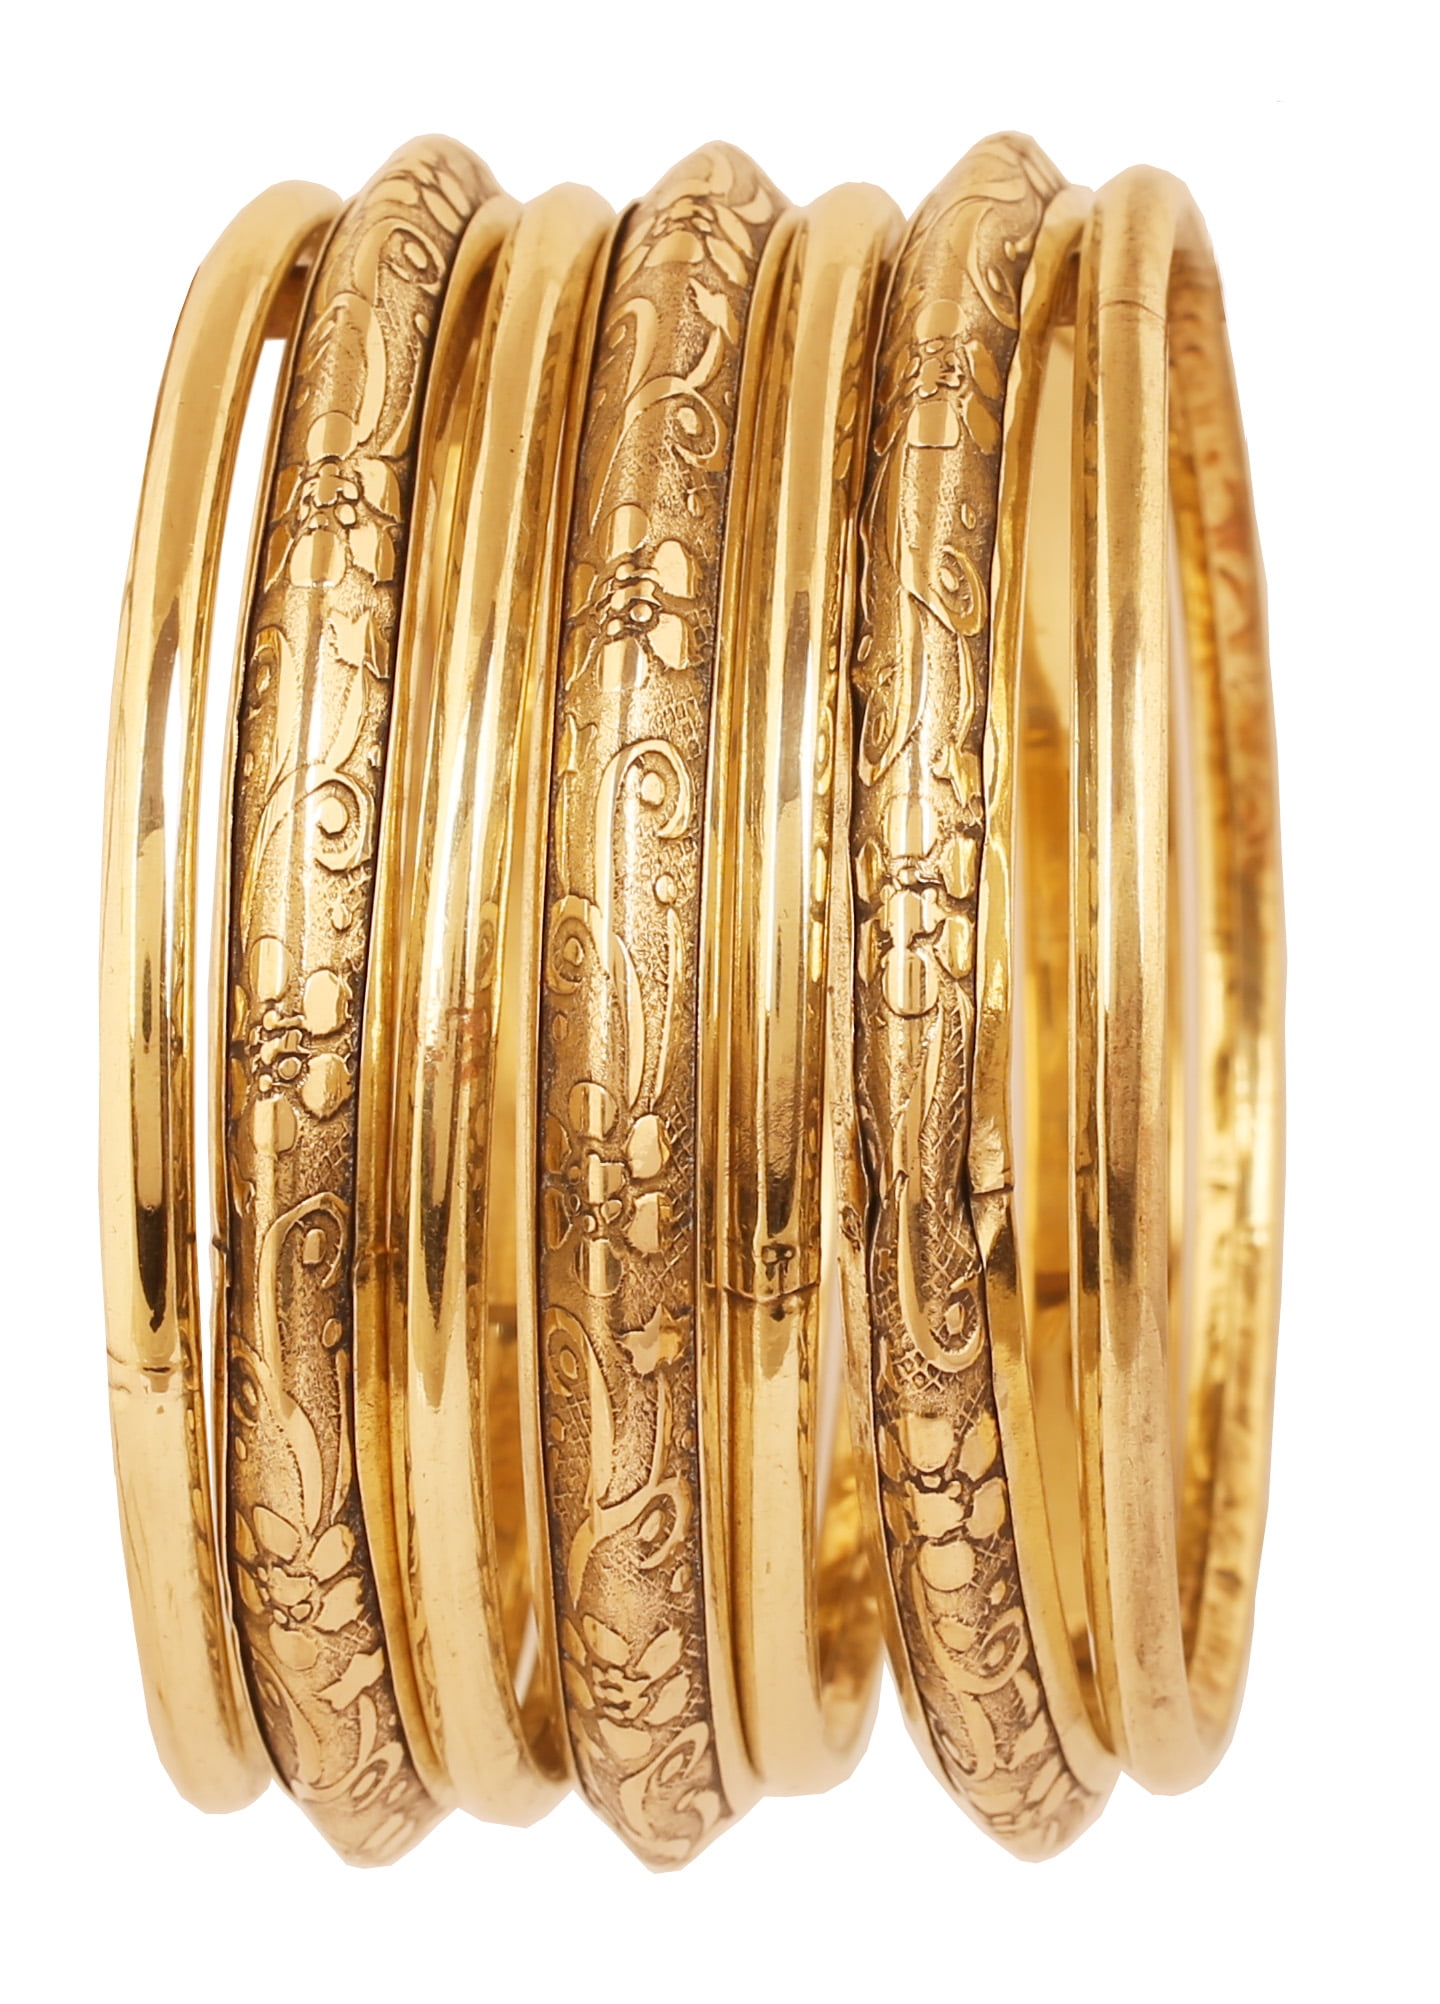  Couture Gems Gold Bangle Bracelets For Women Trendy